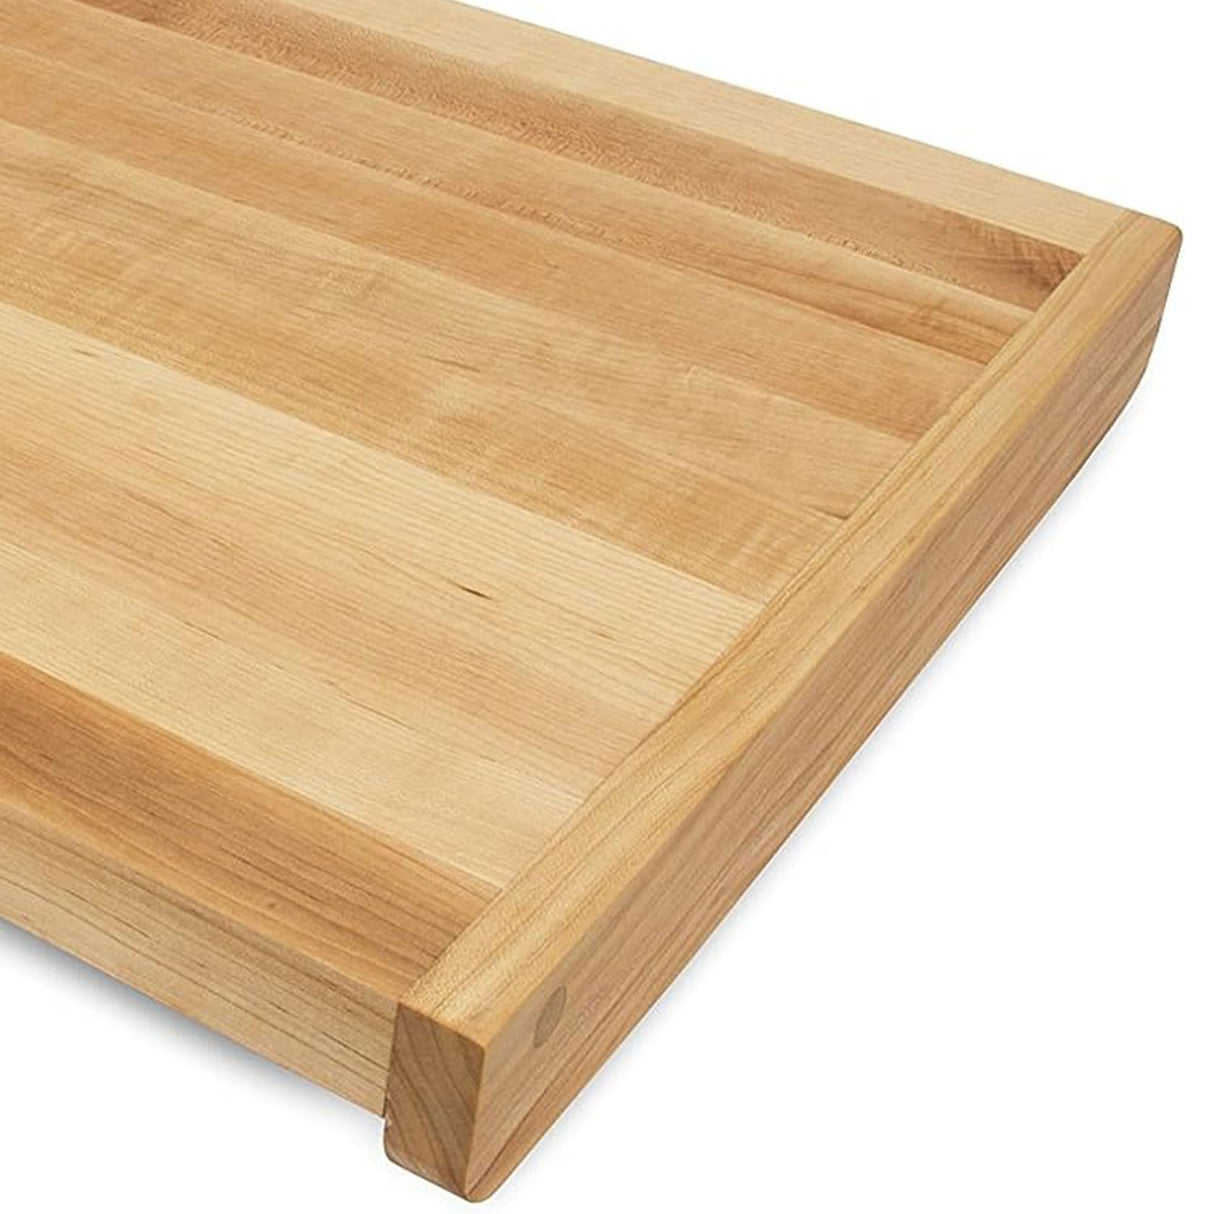 John Boos KNEB23 Maple Wood Cutting Board for Kitchen Prep, 23.75" x 17.25", 1.25 Inch Thick, Edge Grain Reversible Charcuterie Block with Juice Groove 23.75X17.25 MPL-EDGE GR-KNEAD BRD-